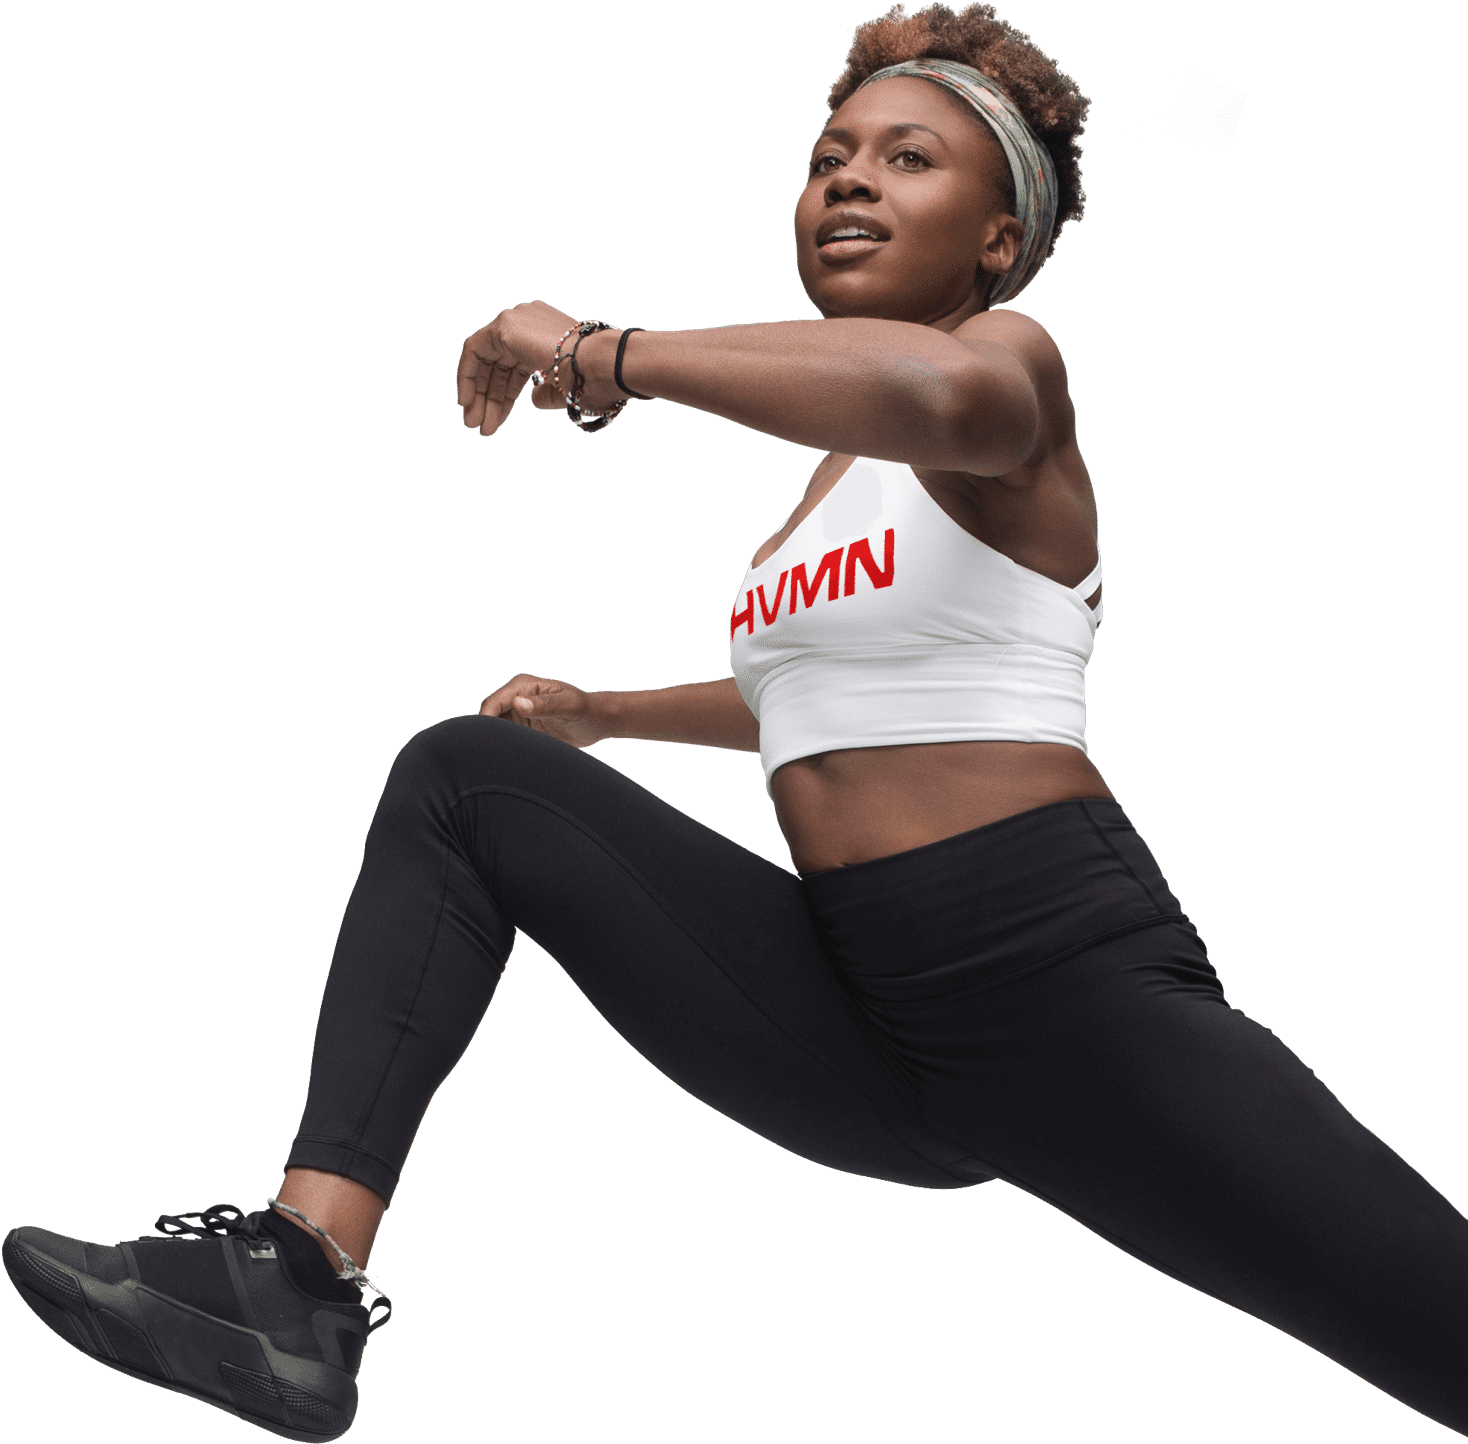 Active Fitness Woman Jumping PNG image